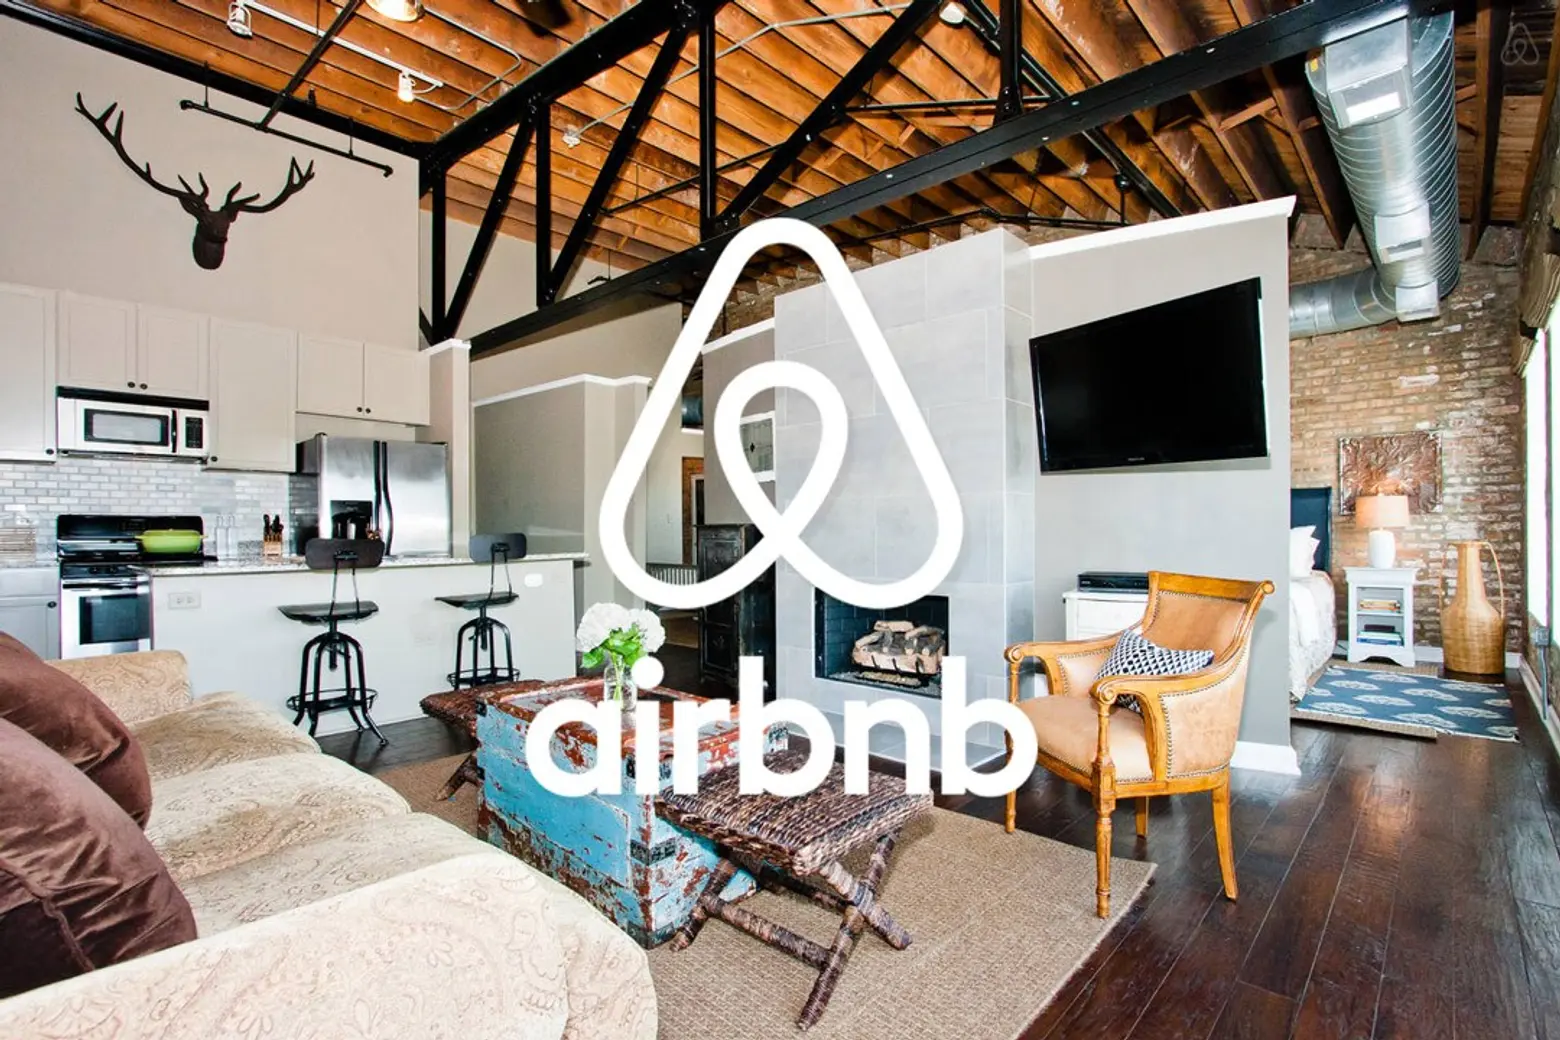 New hotline lets tenants report illegal Airbnb listings